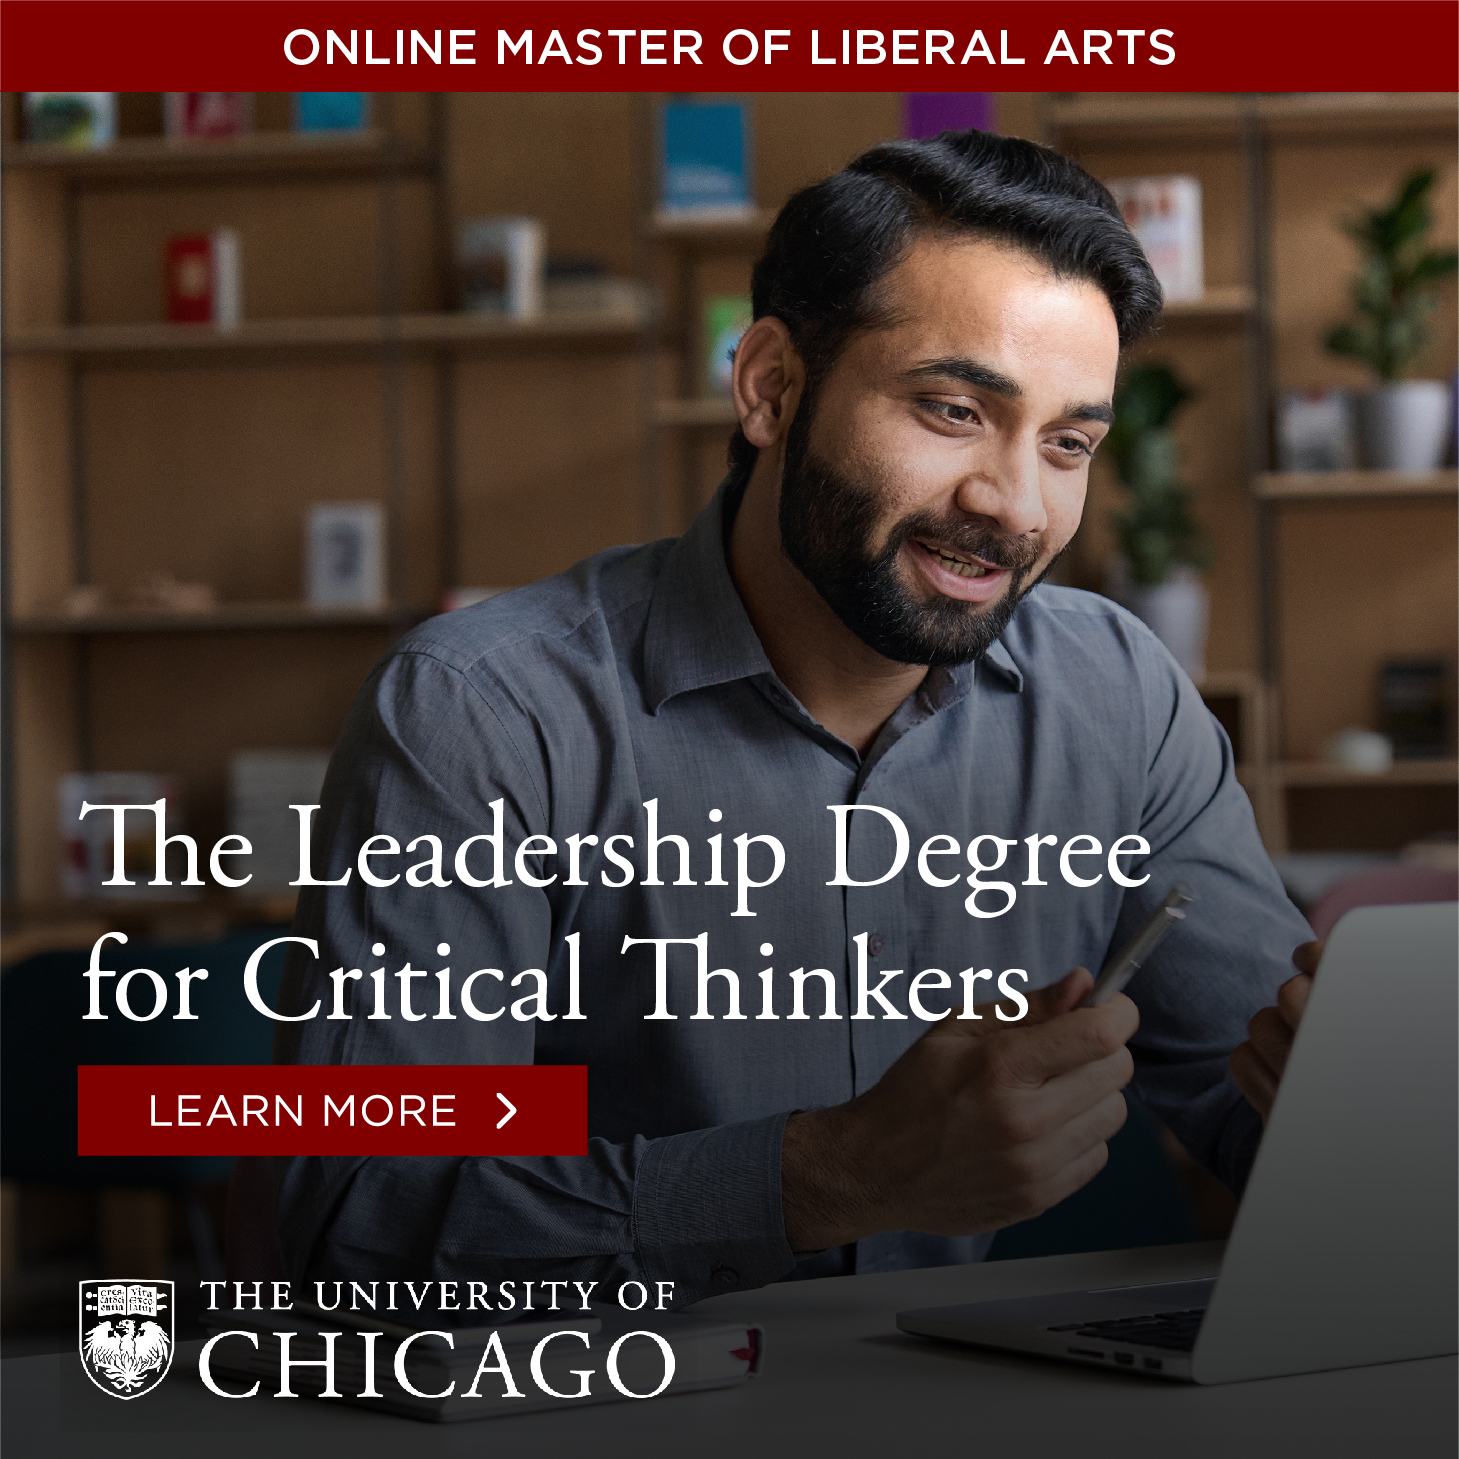 Masters of Liberal Arts degree information